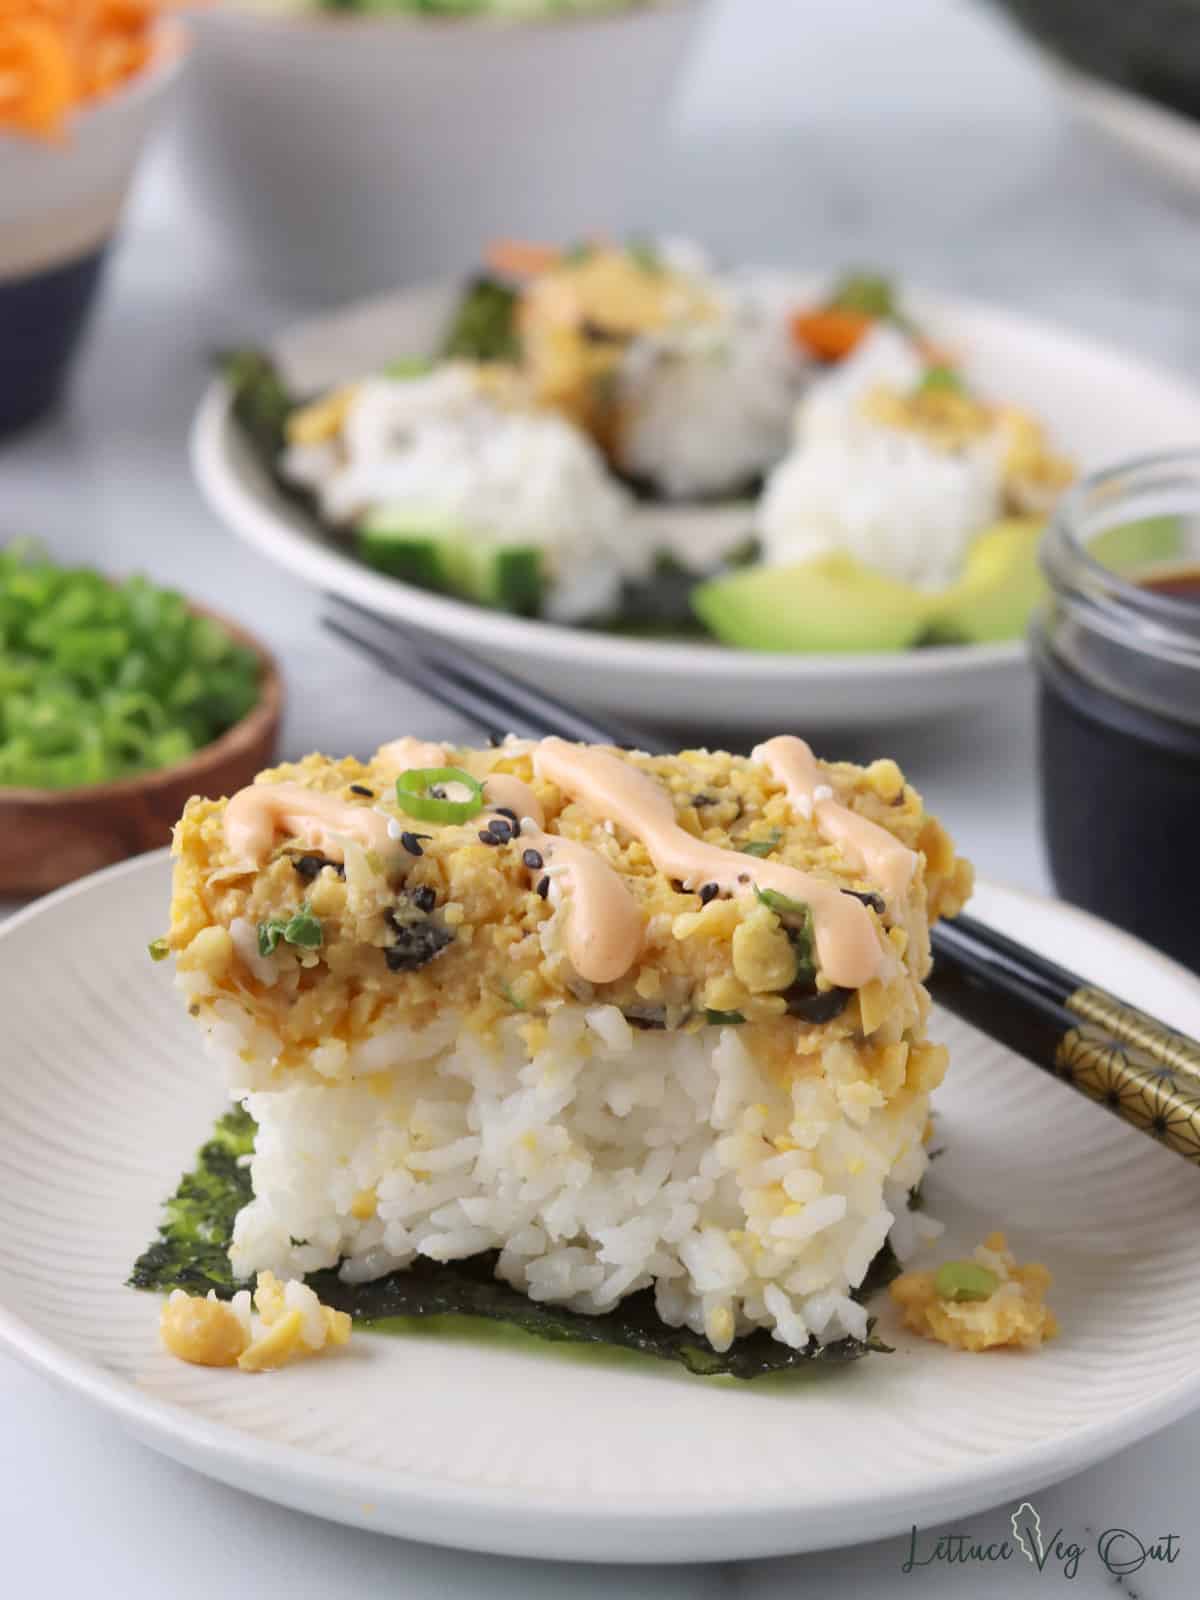 Piece of sushi bake (cooked rice topped with mashed chickpea "tuna") on a square of nori with chopsticks.